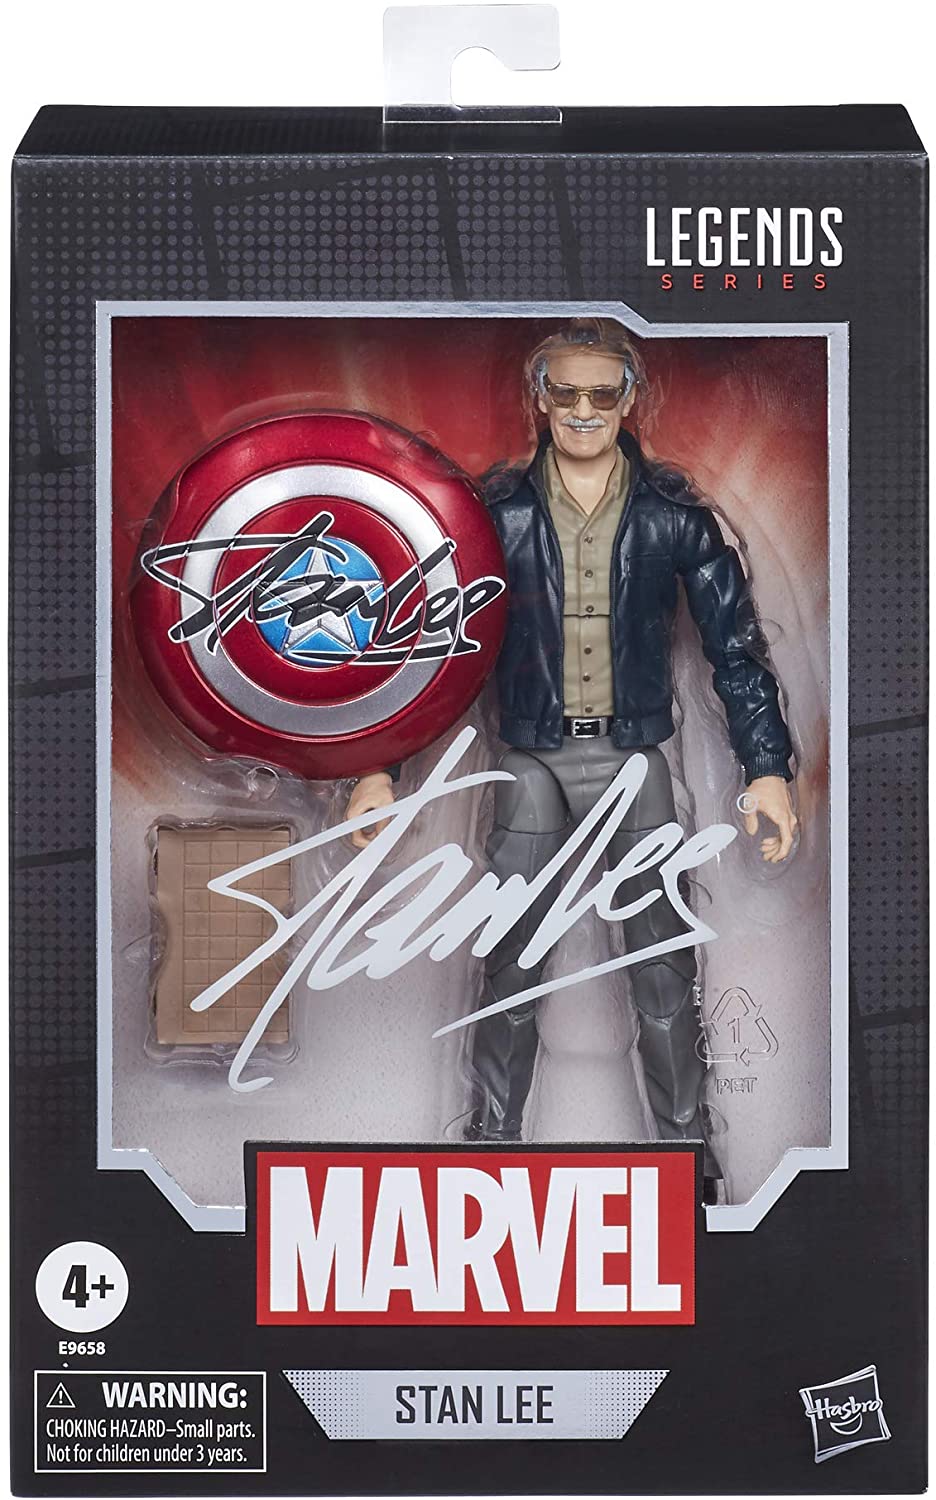 Marvel Legends - Stan Lee Avengers Cameo Action Figure by Hasbro SALE